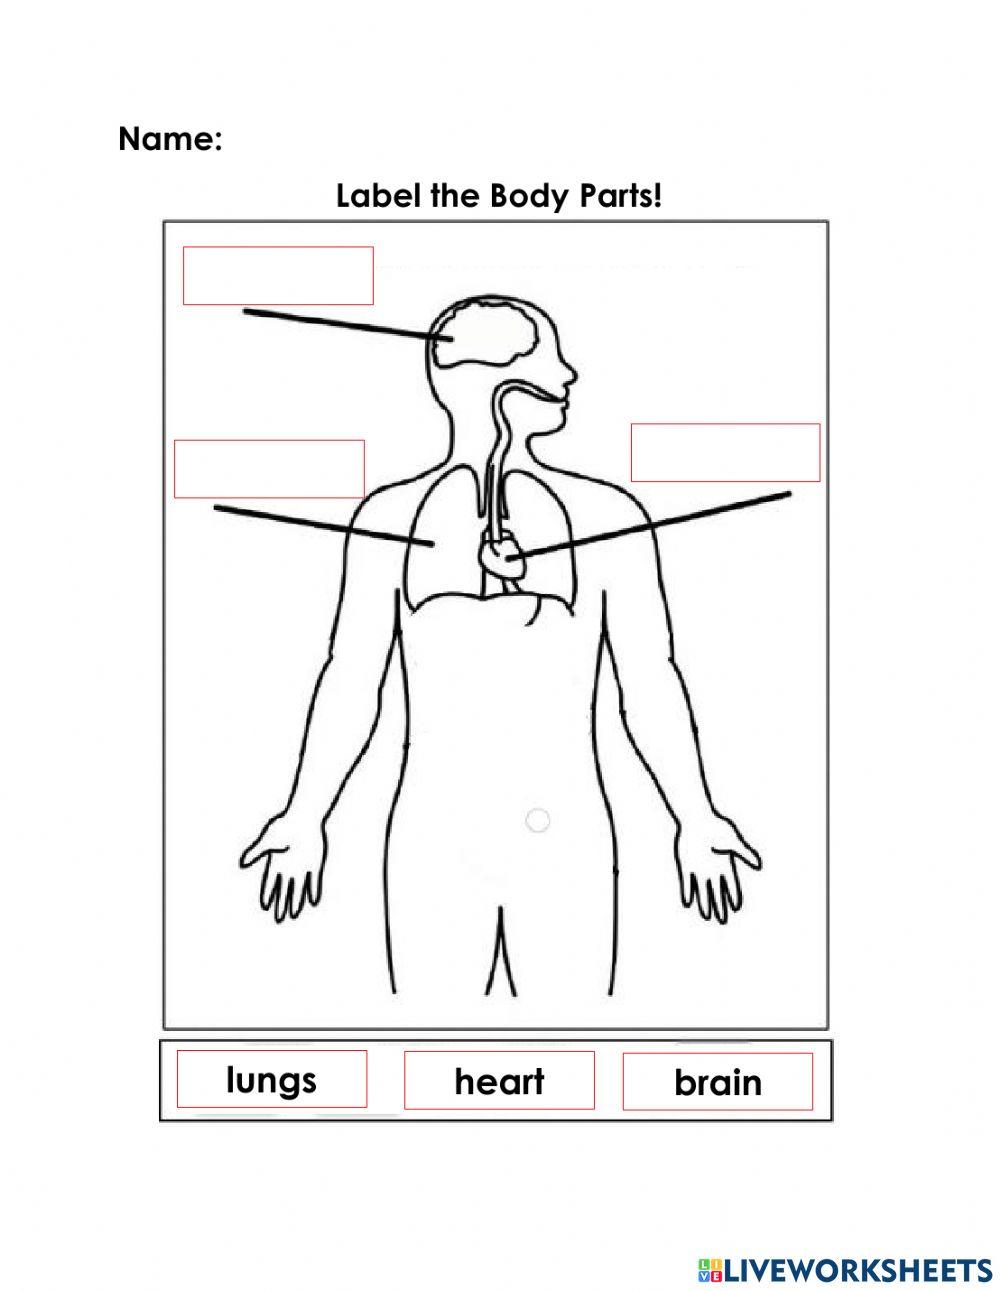 Label the Body Parts